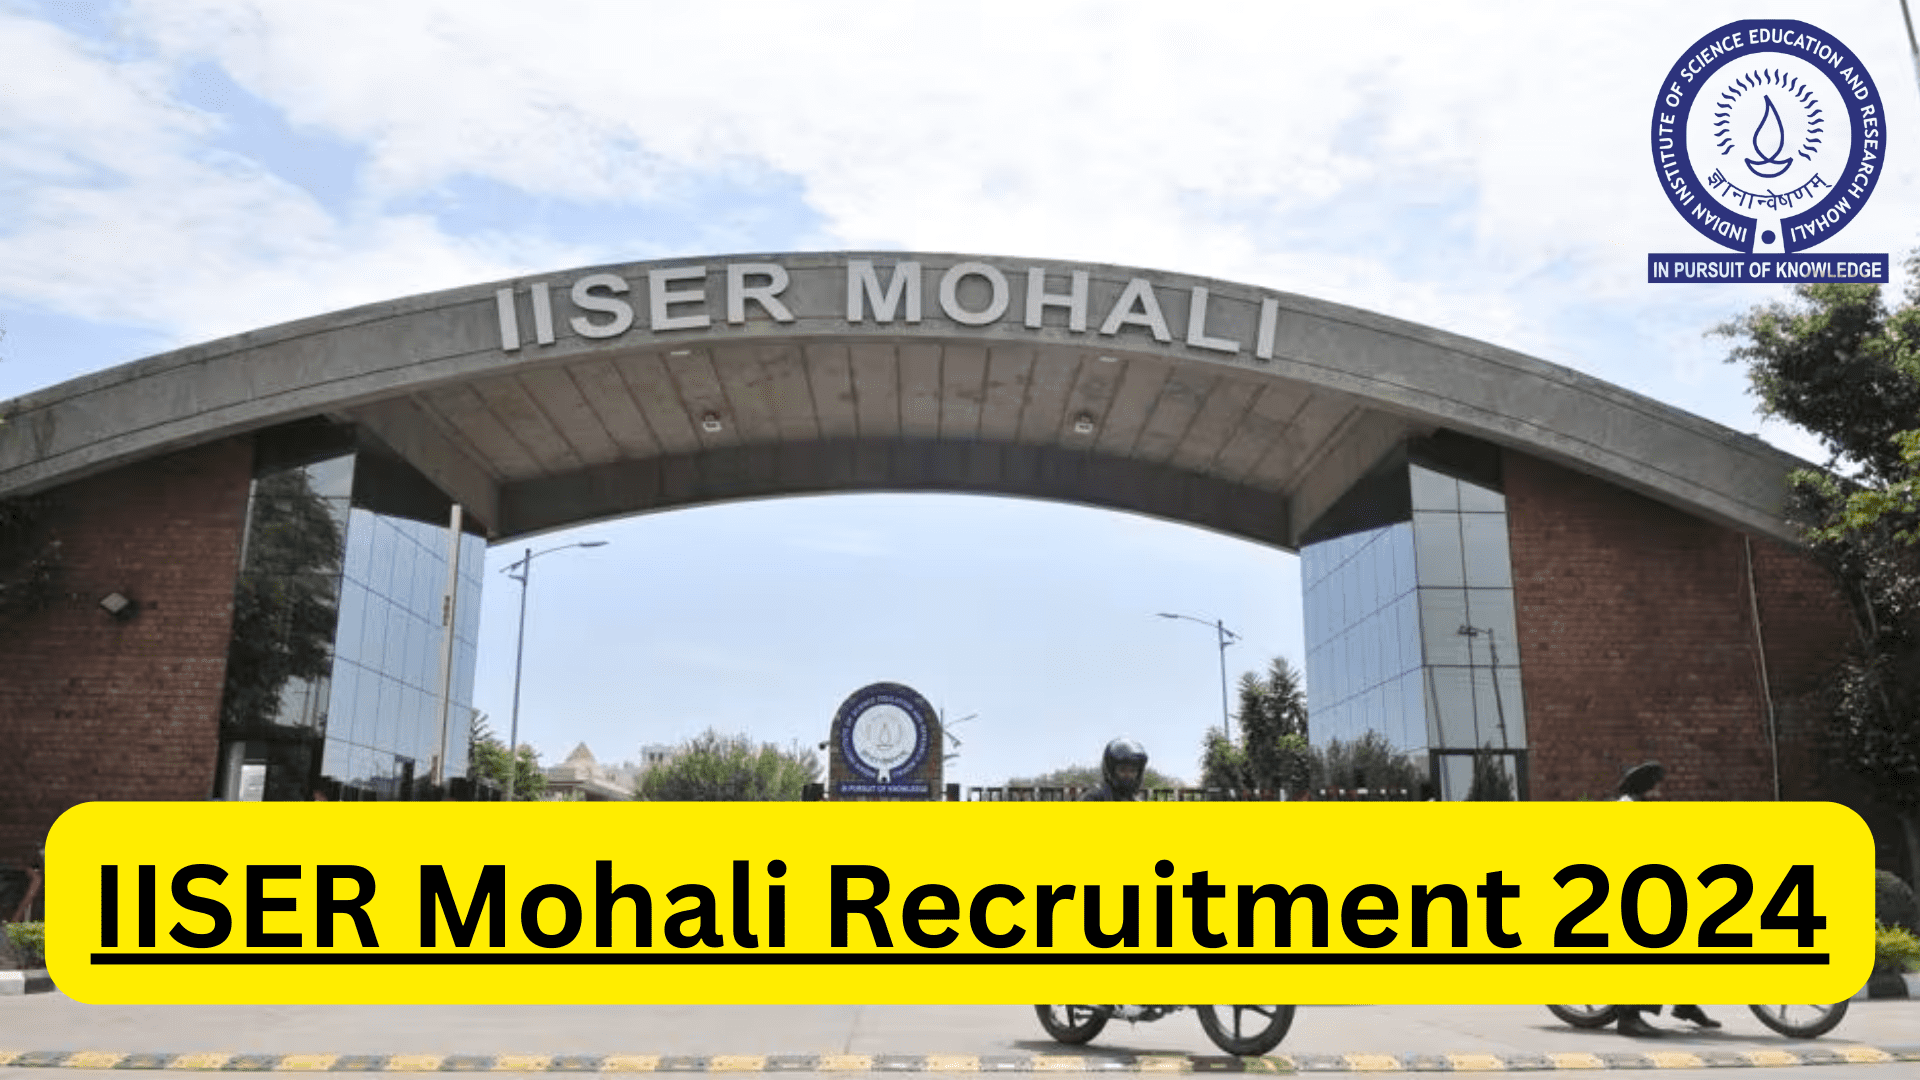 IISER Mohali Recruitment 2024 Scientific Officer Position At IISER